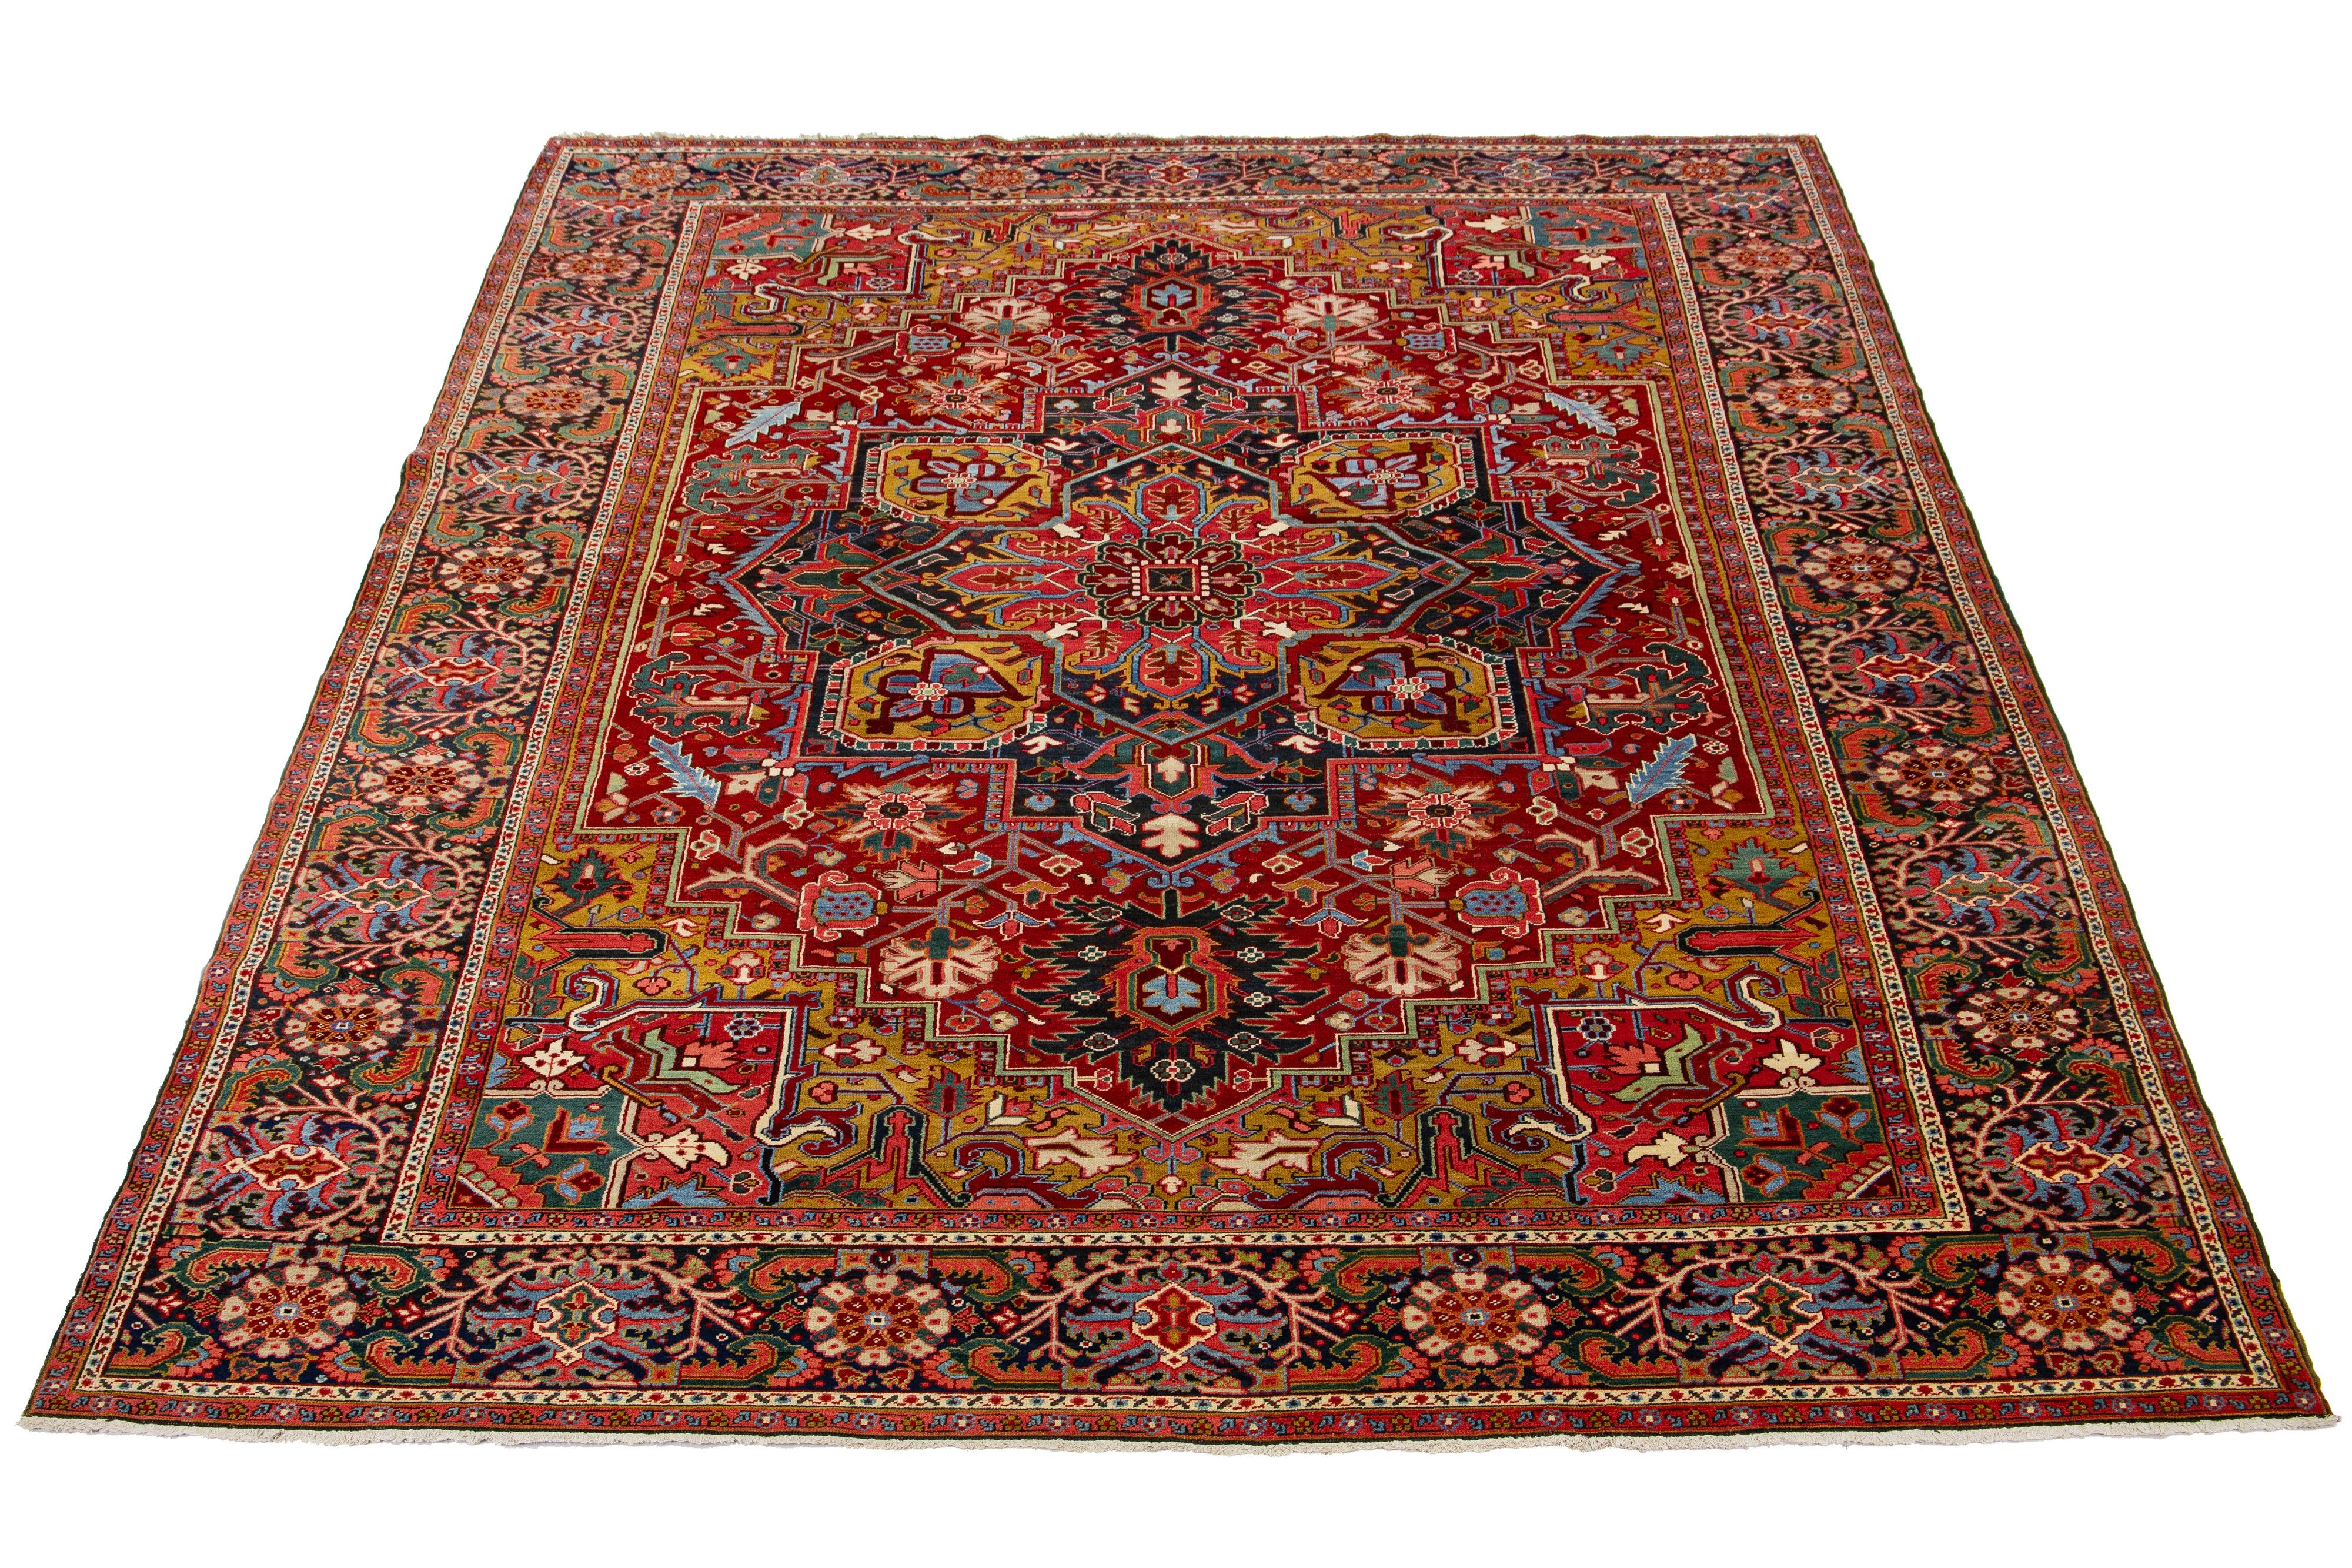 This beautiful antique Heriz hand-knotted wool rug features a red field. The Persian rug highlights a center medallion design with yellow, green, pink, and blue accents.

This rug measures 10' 4